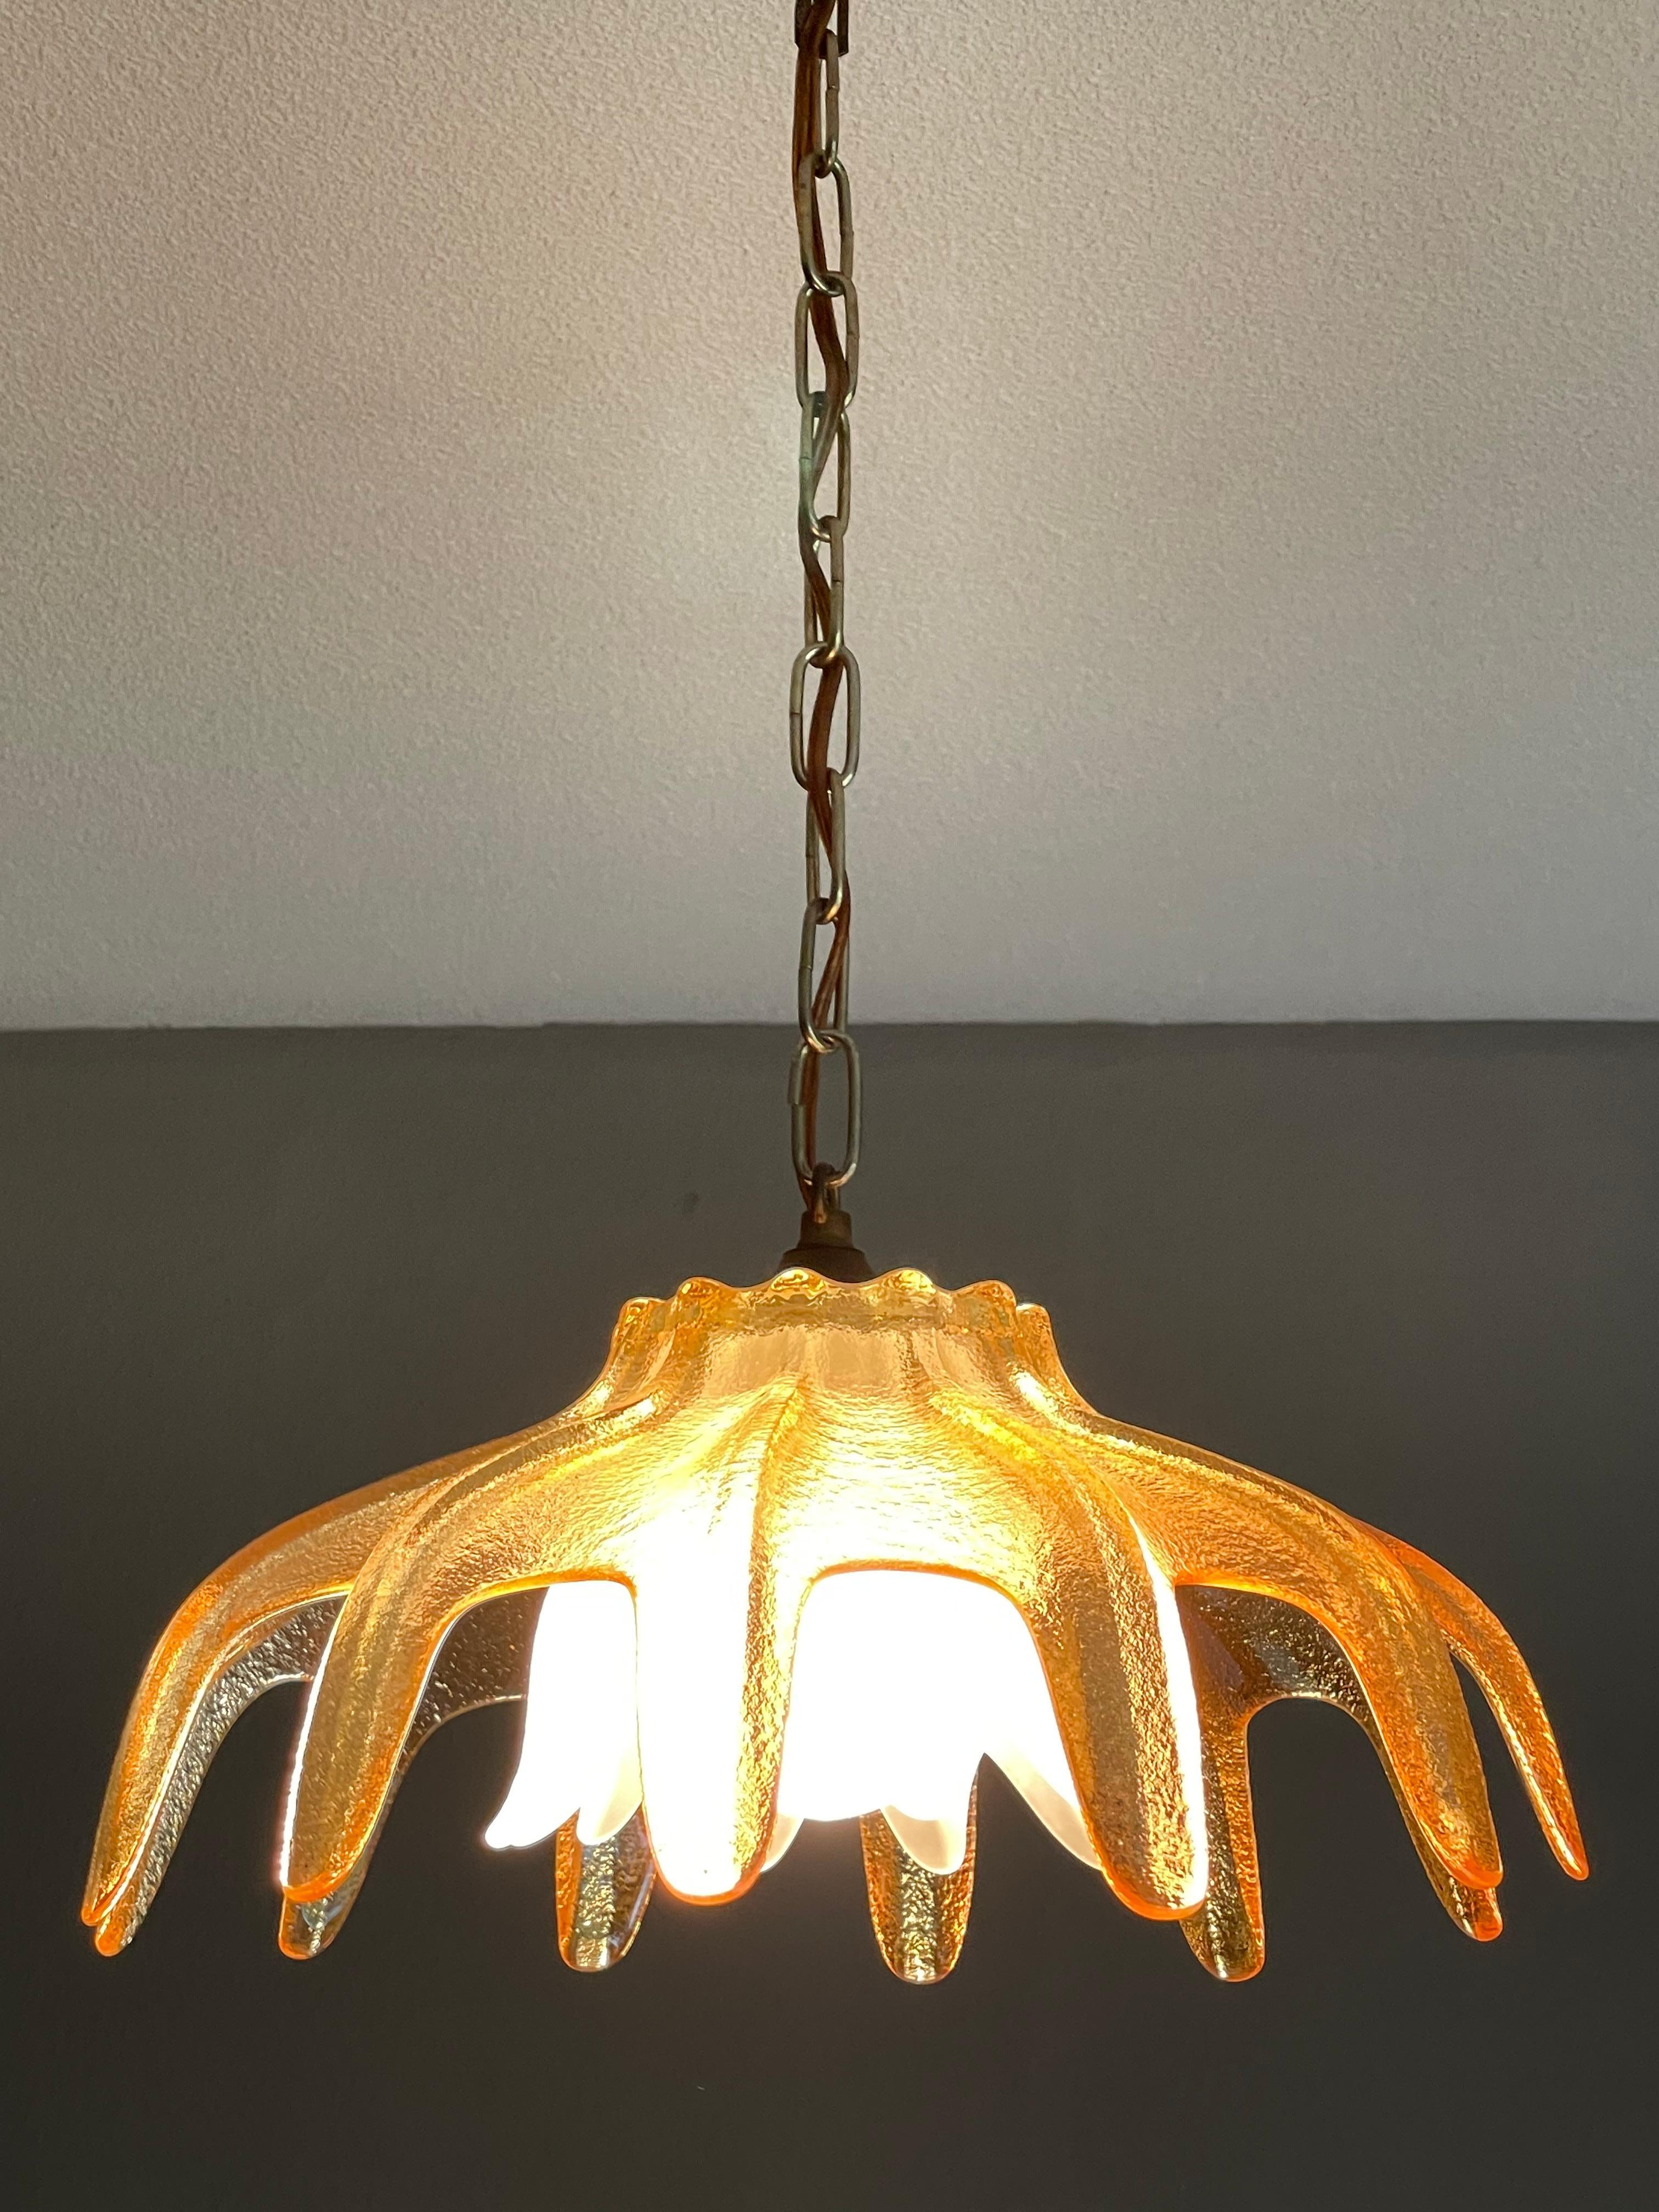 Brass Mouth Blown Midcentury Murano Glass Pendant Attributed to Seguso Vetri d'Arte For Sale